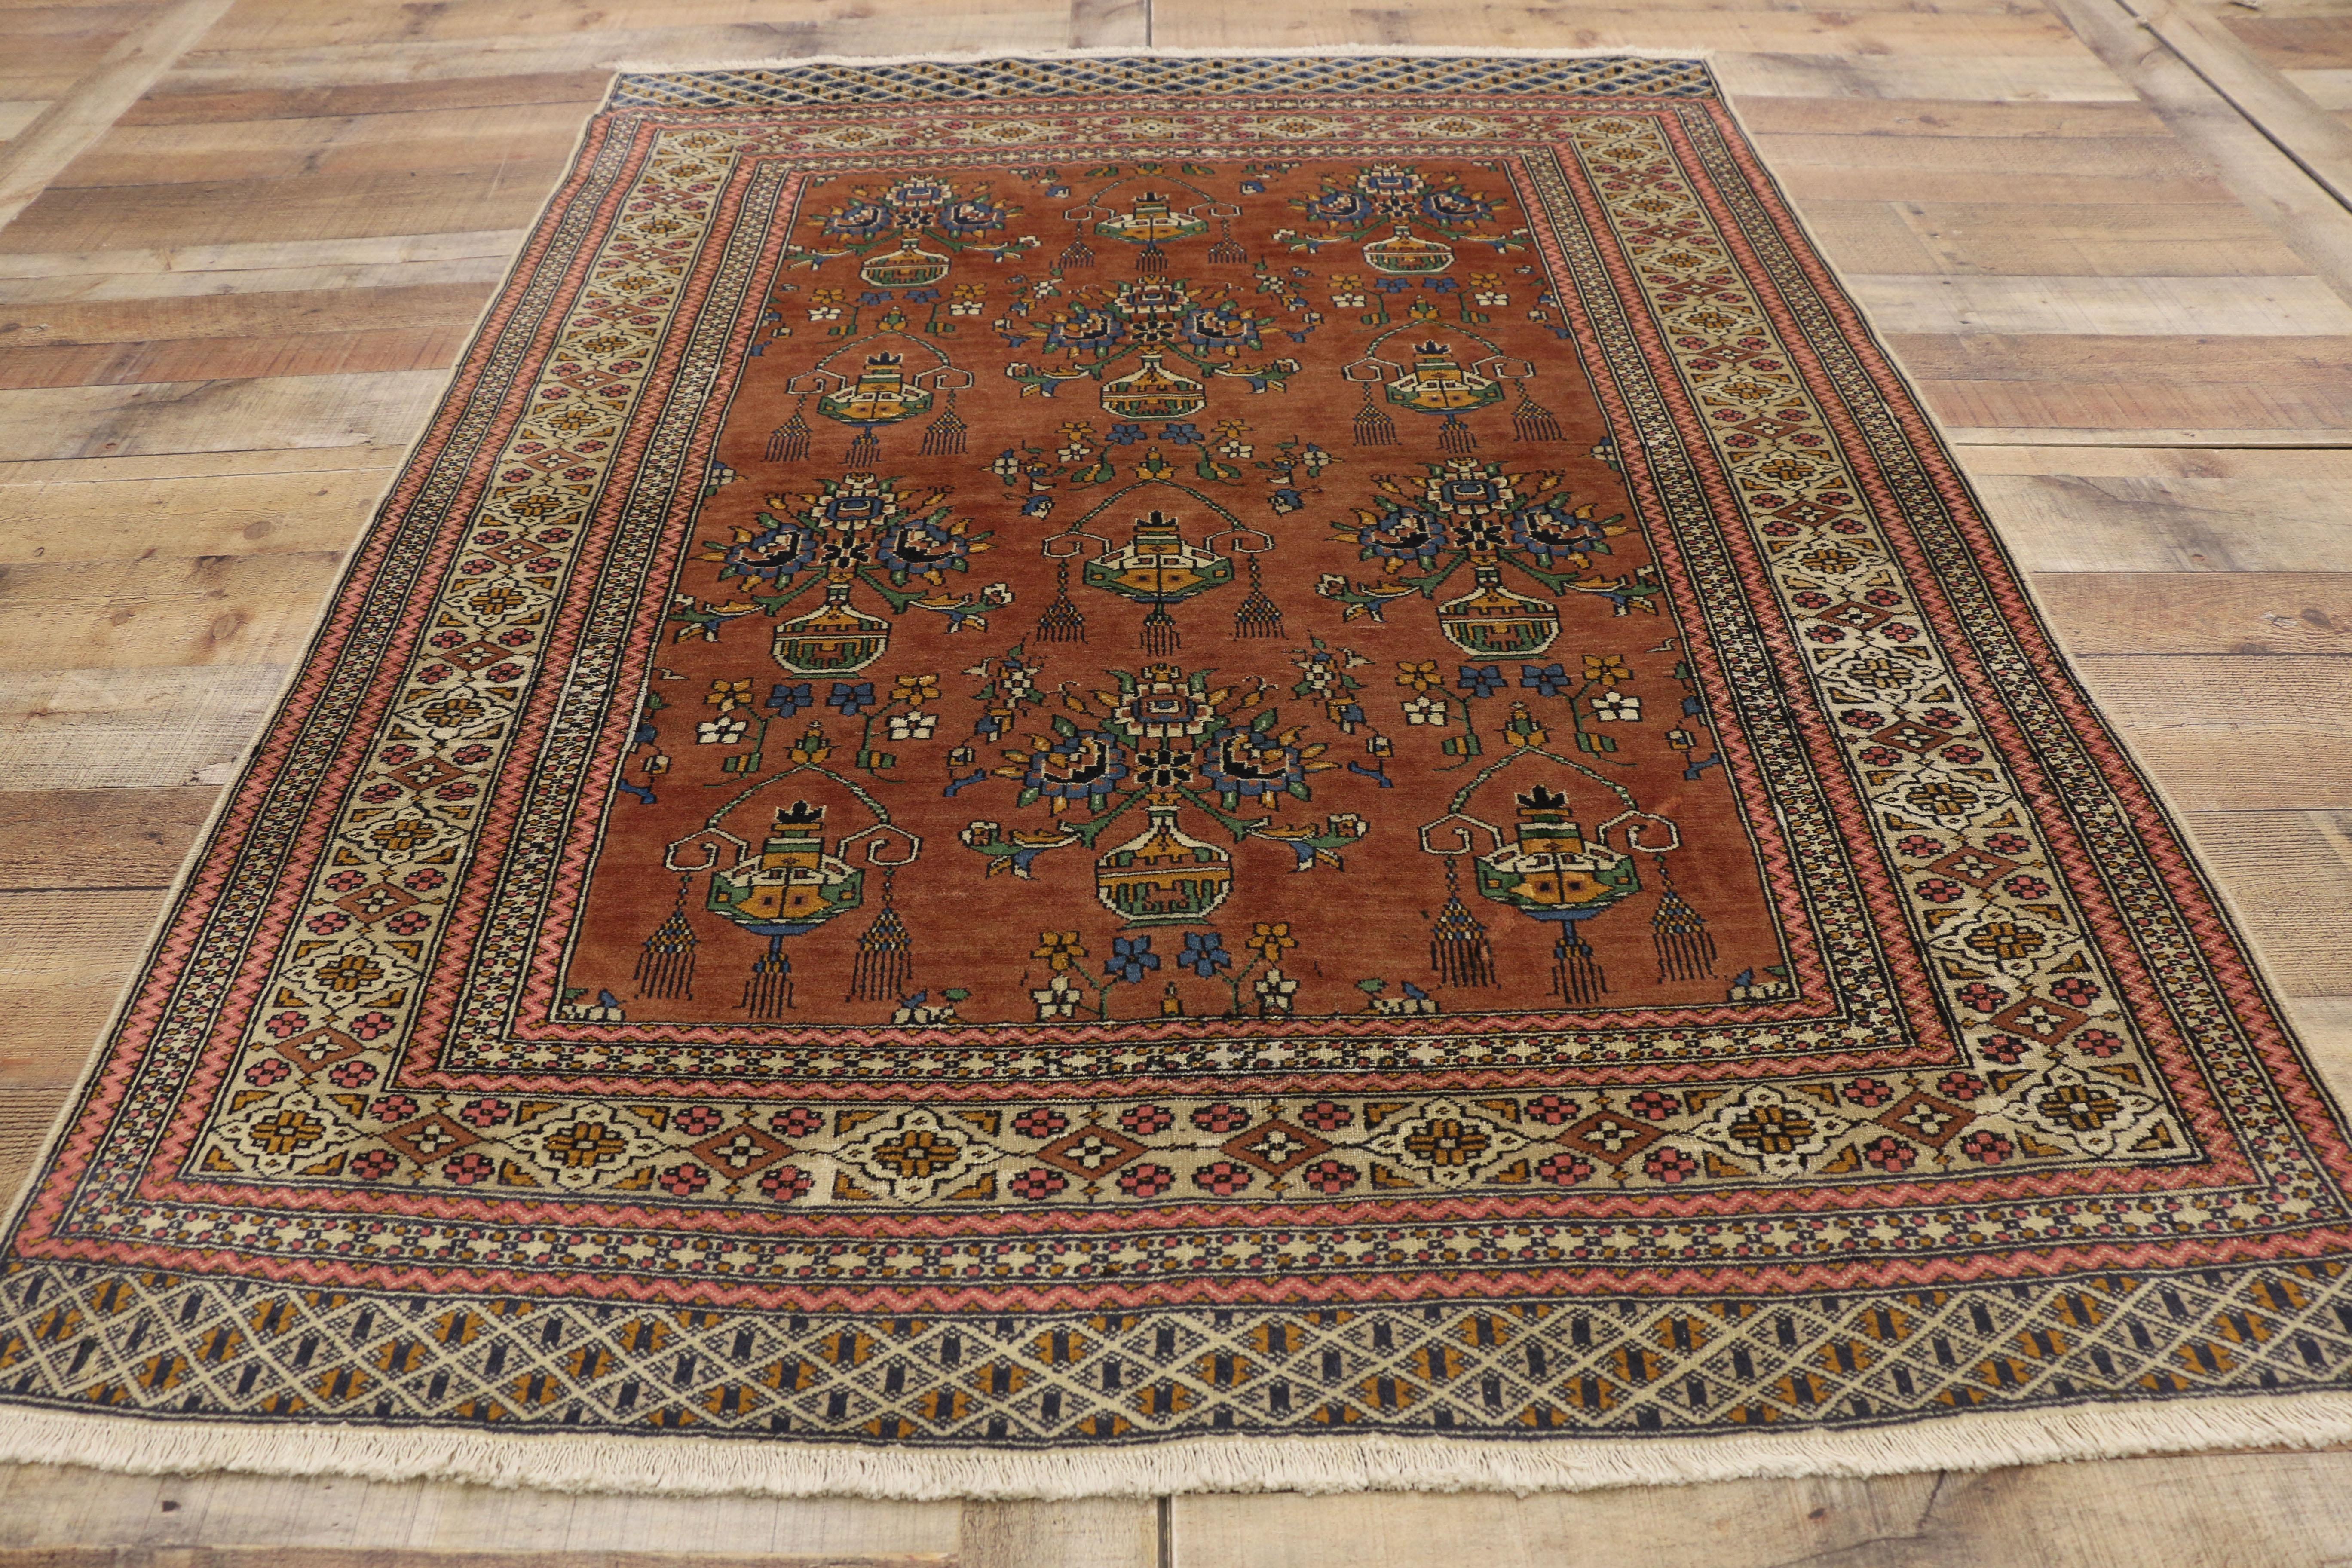 Wool Vintage Turkmen Persian Rug with Floral Vase Design and Arts & Crafts Style